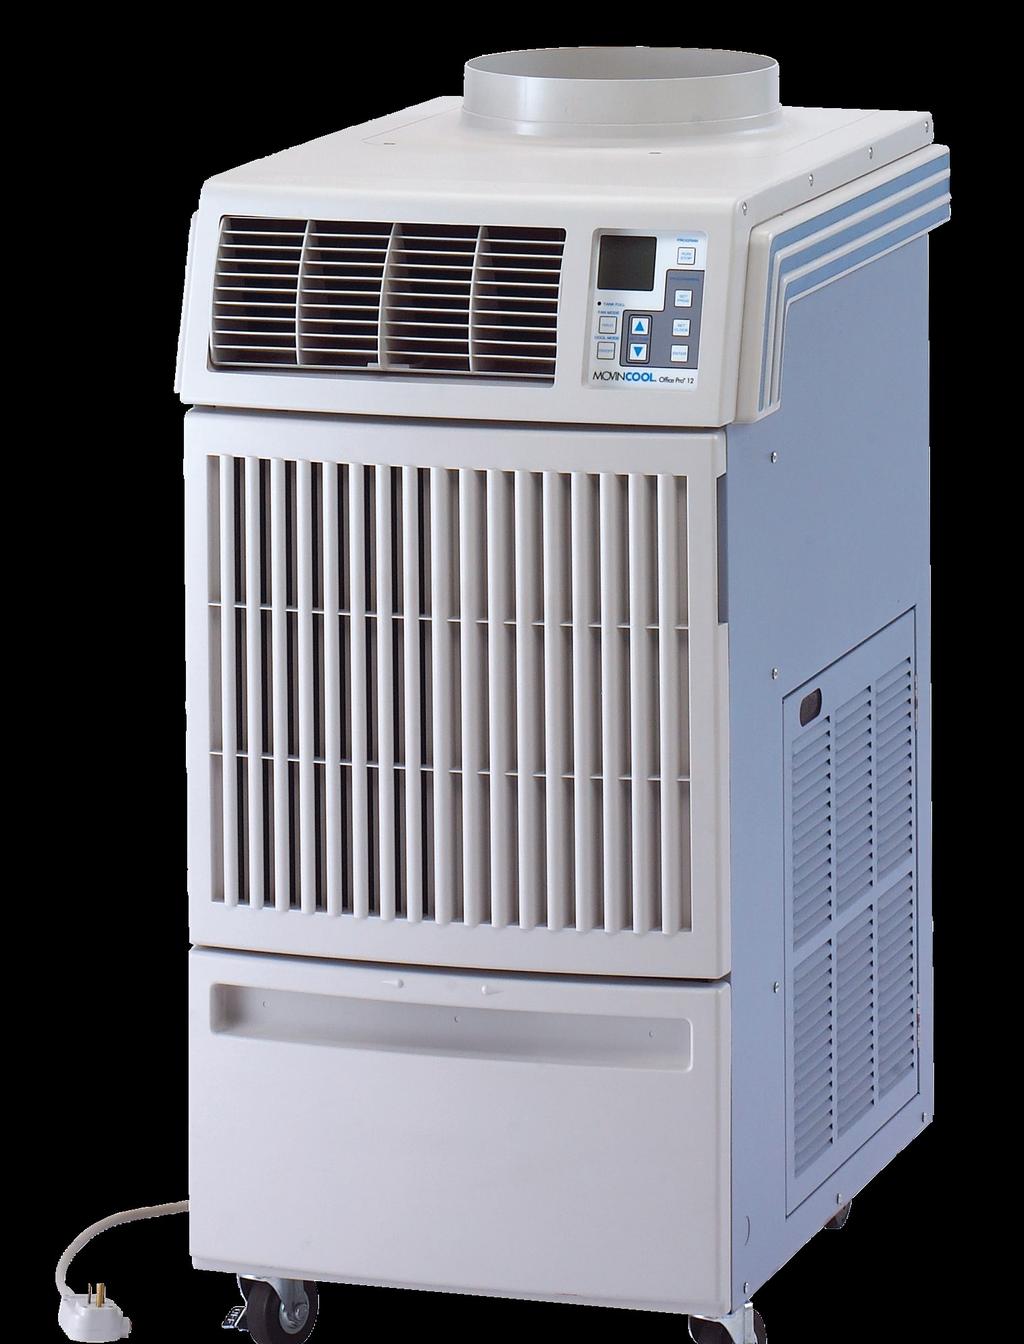 Office Pro 18 Delivering the highest cooling capacity possible from a standard 115V power source, the Office Pro 18 portable air conditioner helps companies cool their heat-sensitive office systems